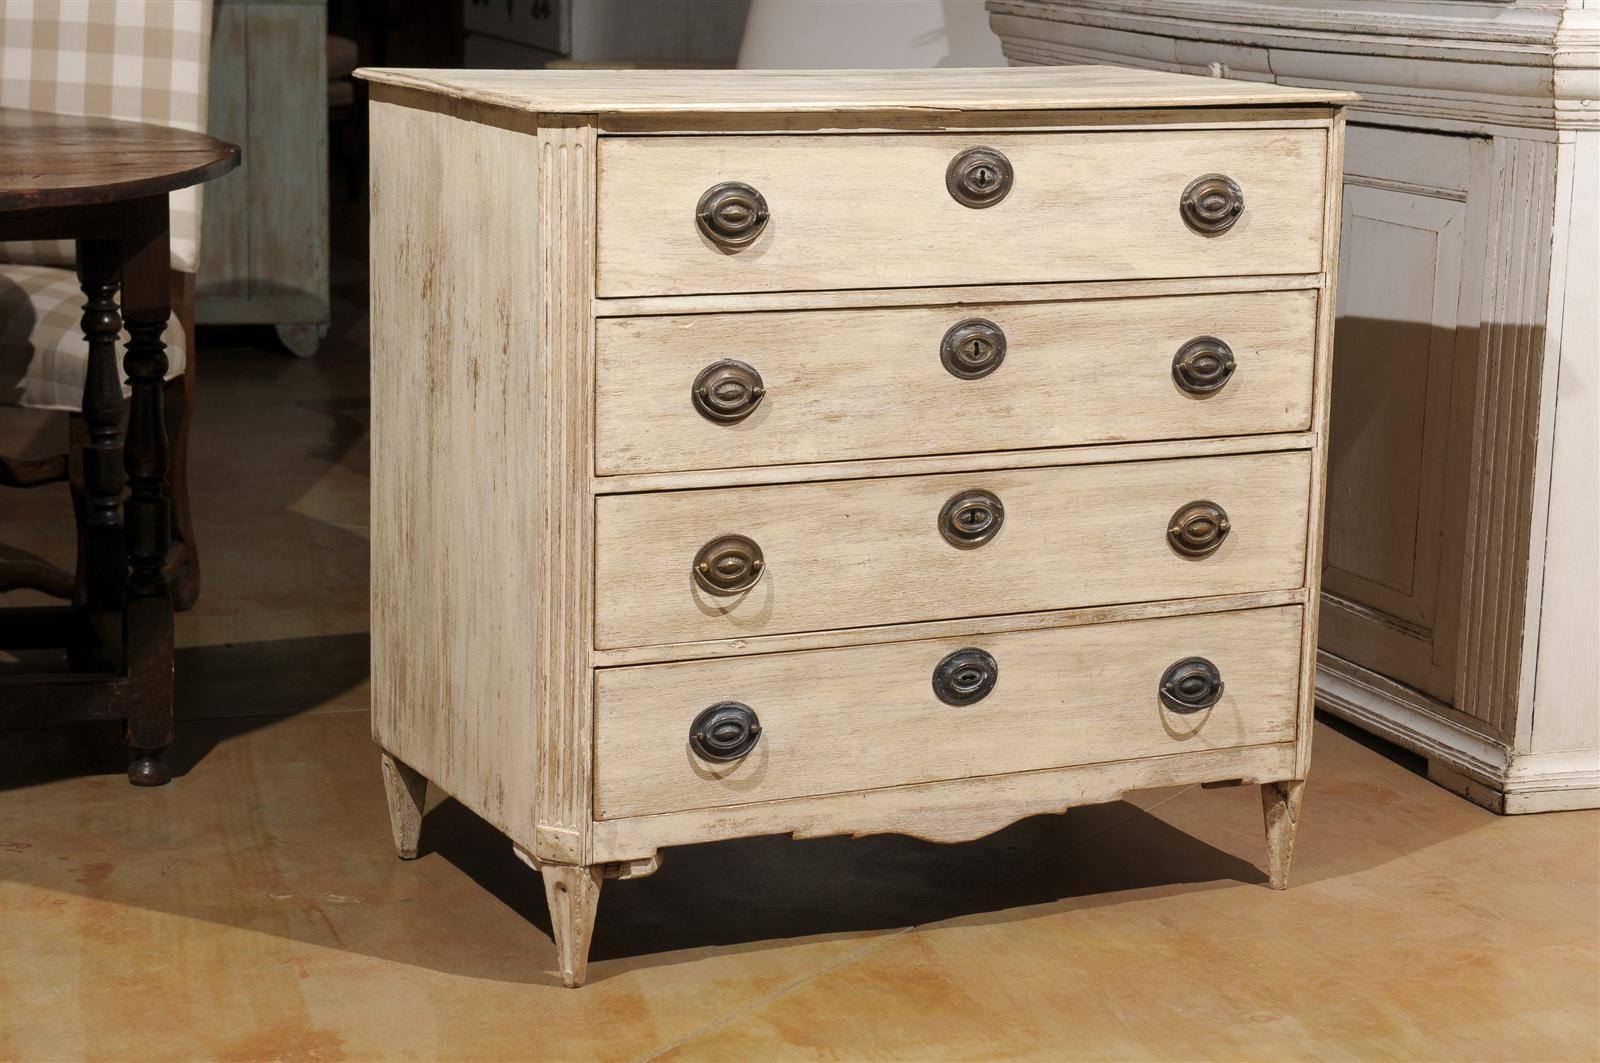 A Swedish period Gustavian four-drawer commode from the late 18th century with its old hardware. This Swedish chest circa 1780 features a rectangular top with chamfered sides in the front. Each drawer is adorned with oval escutcheons and handles. In